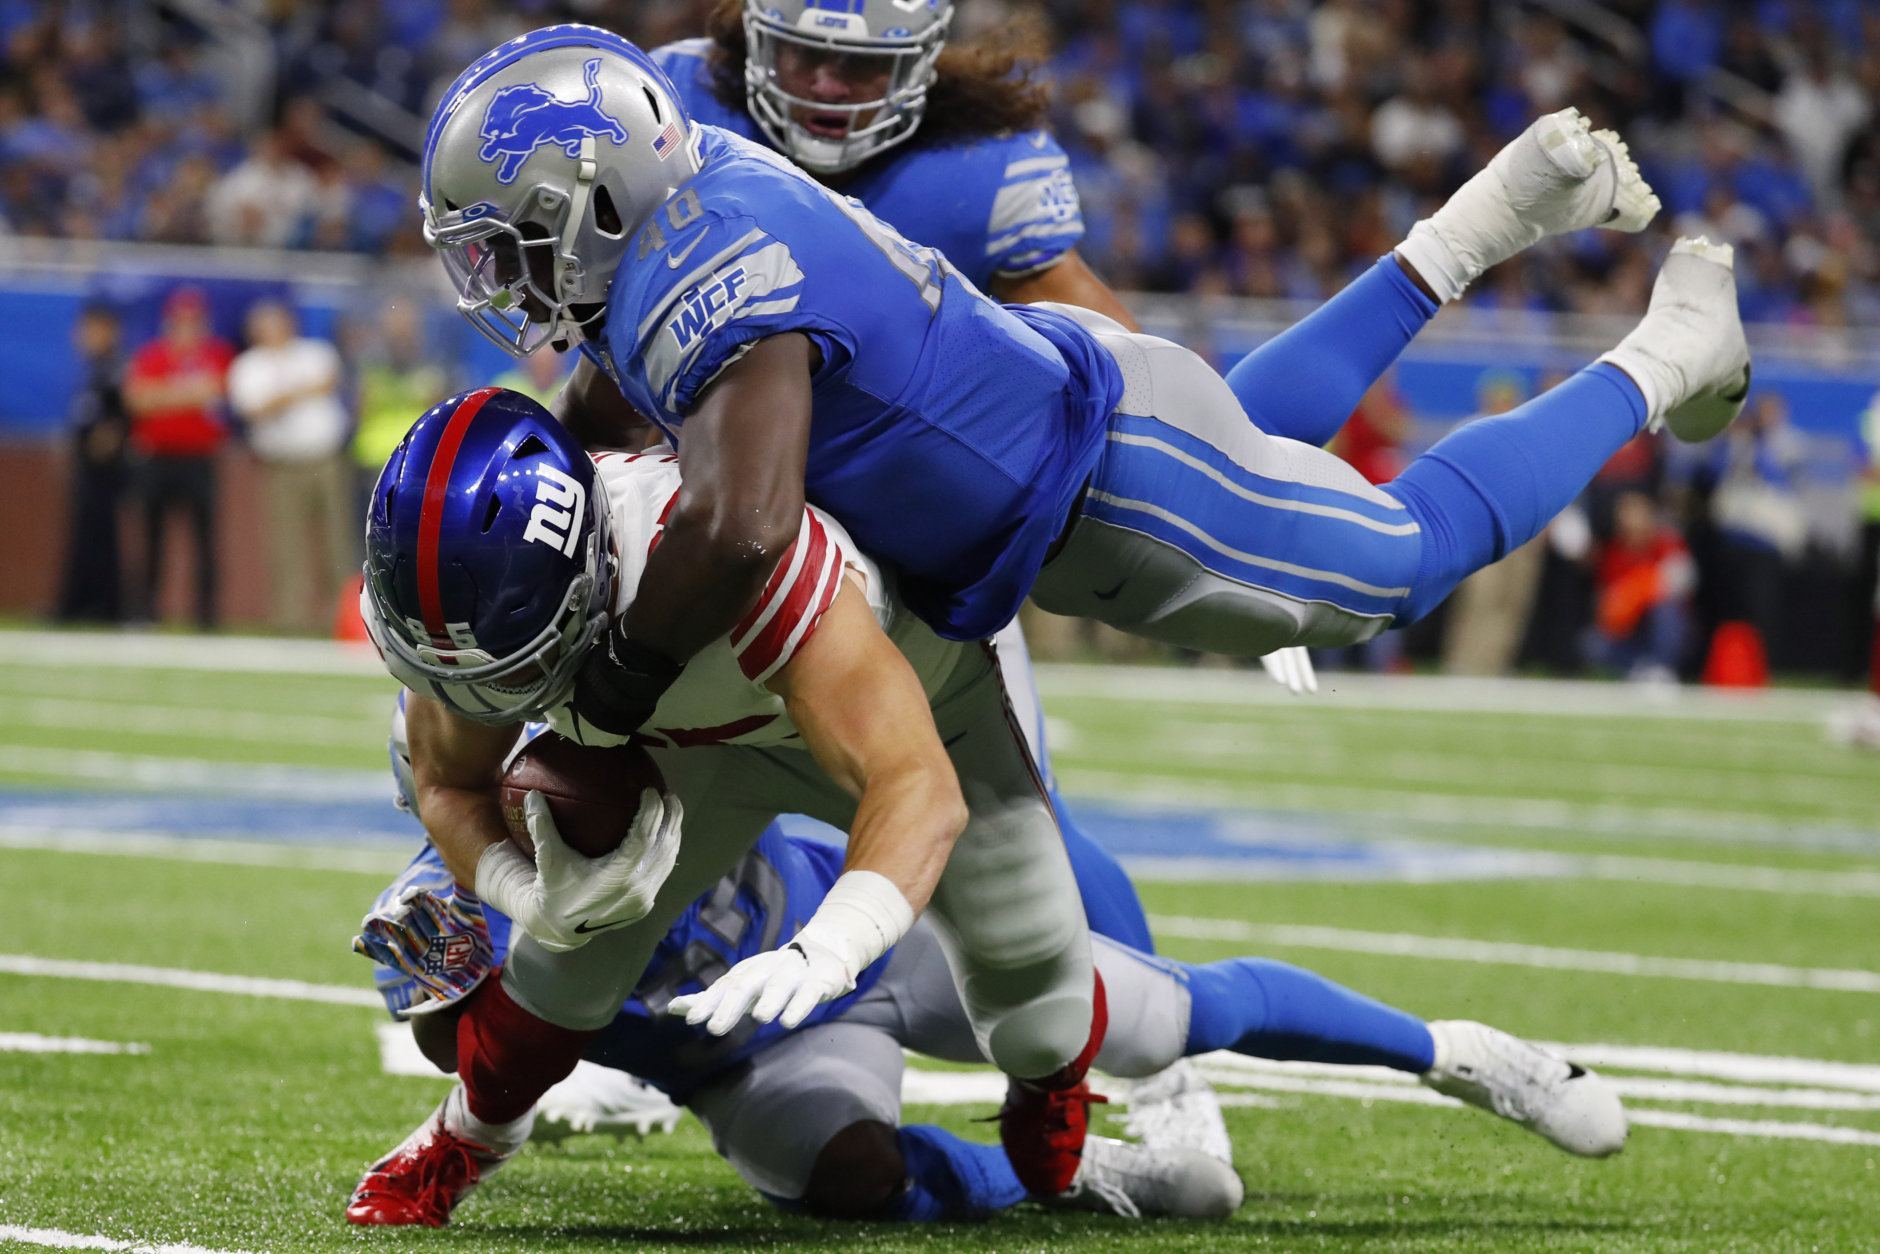 <p><b><i>Giants 26</i></b><br />
<b><i>Lions 31</i></b></p>
<p>Snacks Harrison didn&#8217;t exactly feast on the Giants in his first game against Big Blue since being traded a year ago, but Detroit is quietly in the NFC playoff hunt in a top-heavy conference.</p>
